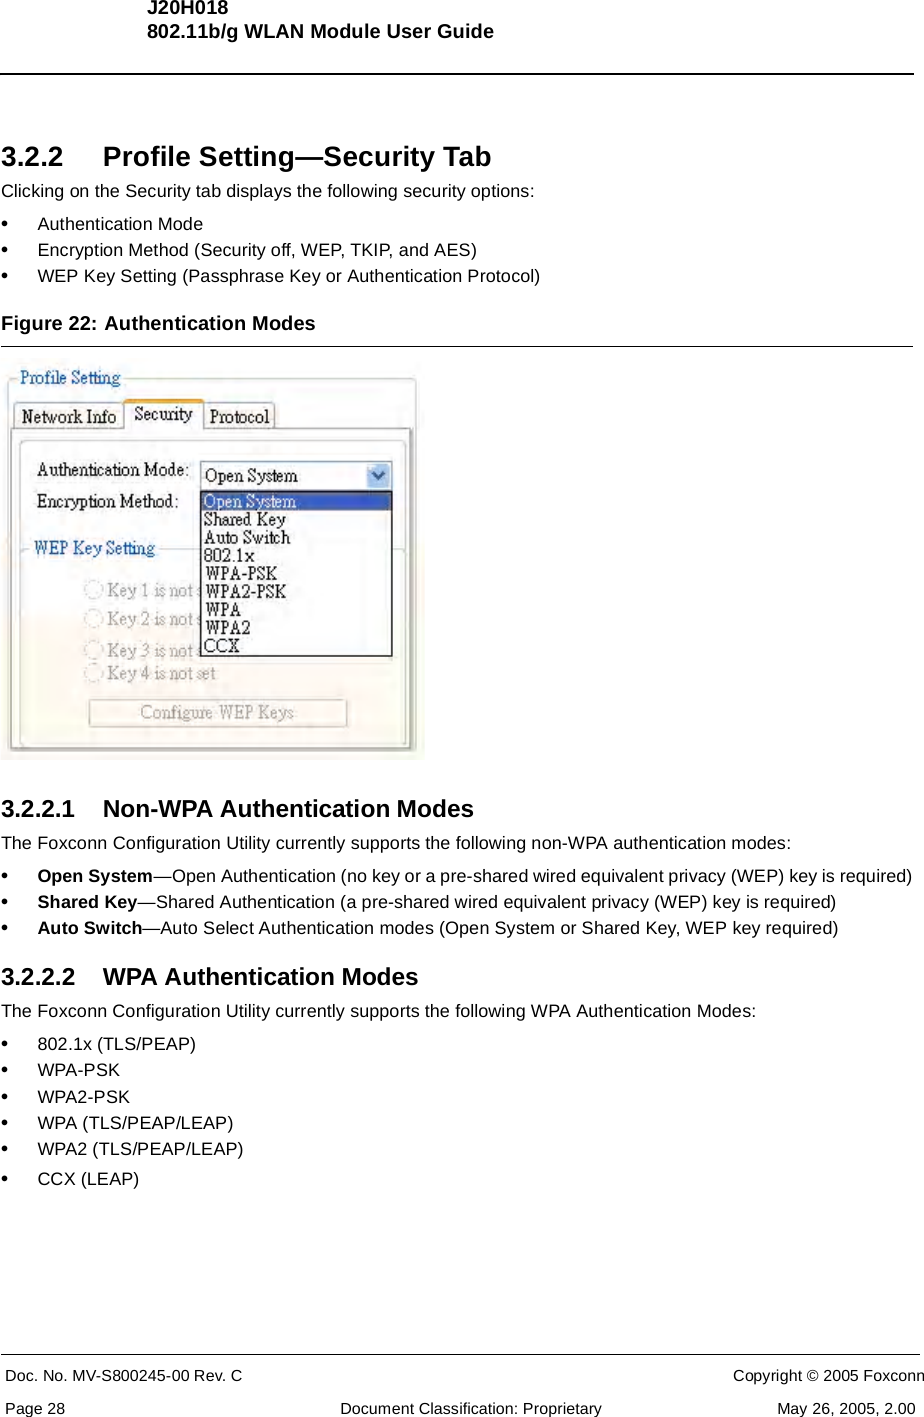 J20H018802.11b/g WLAN Module User GuideDoc. No. MV-S800245-00 Rev. C  CONFIDENTIAL  Copyright © 2005 FoxconnPage 28  Document Classification: Proprietary May 26, 2005, 2.003.2.2 Profile Setting—Security TabClicking on the Security tab displays the following security options:•Authentication Mode•Encryption Method (Security off, WEP, TKIP, and AES)•WEP Key Setting (Passphrase Key or Authentication Protocol)Figure 22: Authentication Modes 3.2.2.1 Non-WPA Authentication ModesThe Foxconn Configuration Utility currently supports the following non-WPA authentication modes:•Open System—Open Authentication (no key or a pre-shared wired equivalent privacy (WEP) key is required)•Shared Key—Shared Authentication (a pre-shared wired equivalent privacy (WEP) key is required)•Auto Switch—Auto Select Authentication modes (Open System or Shared Key, WEP key required)3.2.2.2 WPA Authentication ModesThe Foxconn Configuration Utility currently supports the following WPA Authentication Modes:•802.1x (TLS/PEAP)•WPA-PSK•WPA2-PSK•WPA (TLS/PEAP/LEAP)•WPA2 (TLS/PEAP/LEAP)•CCX (LEAP)